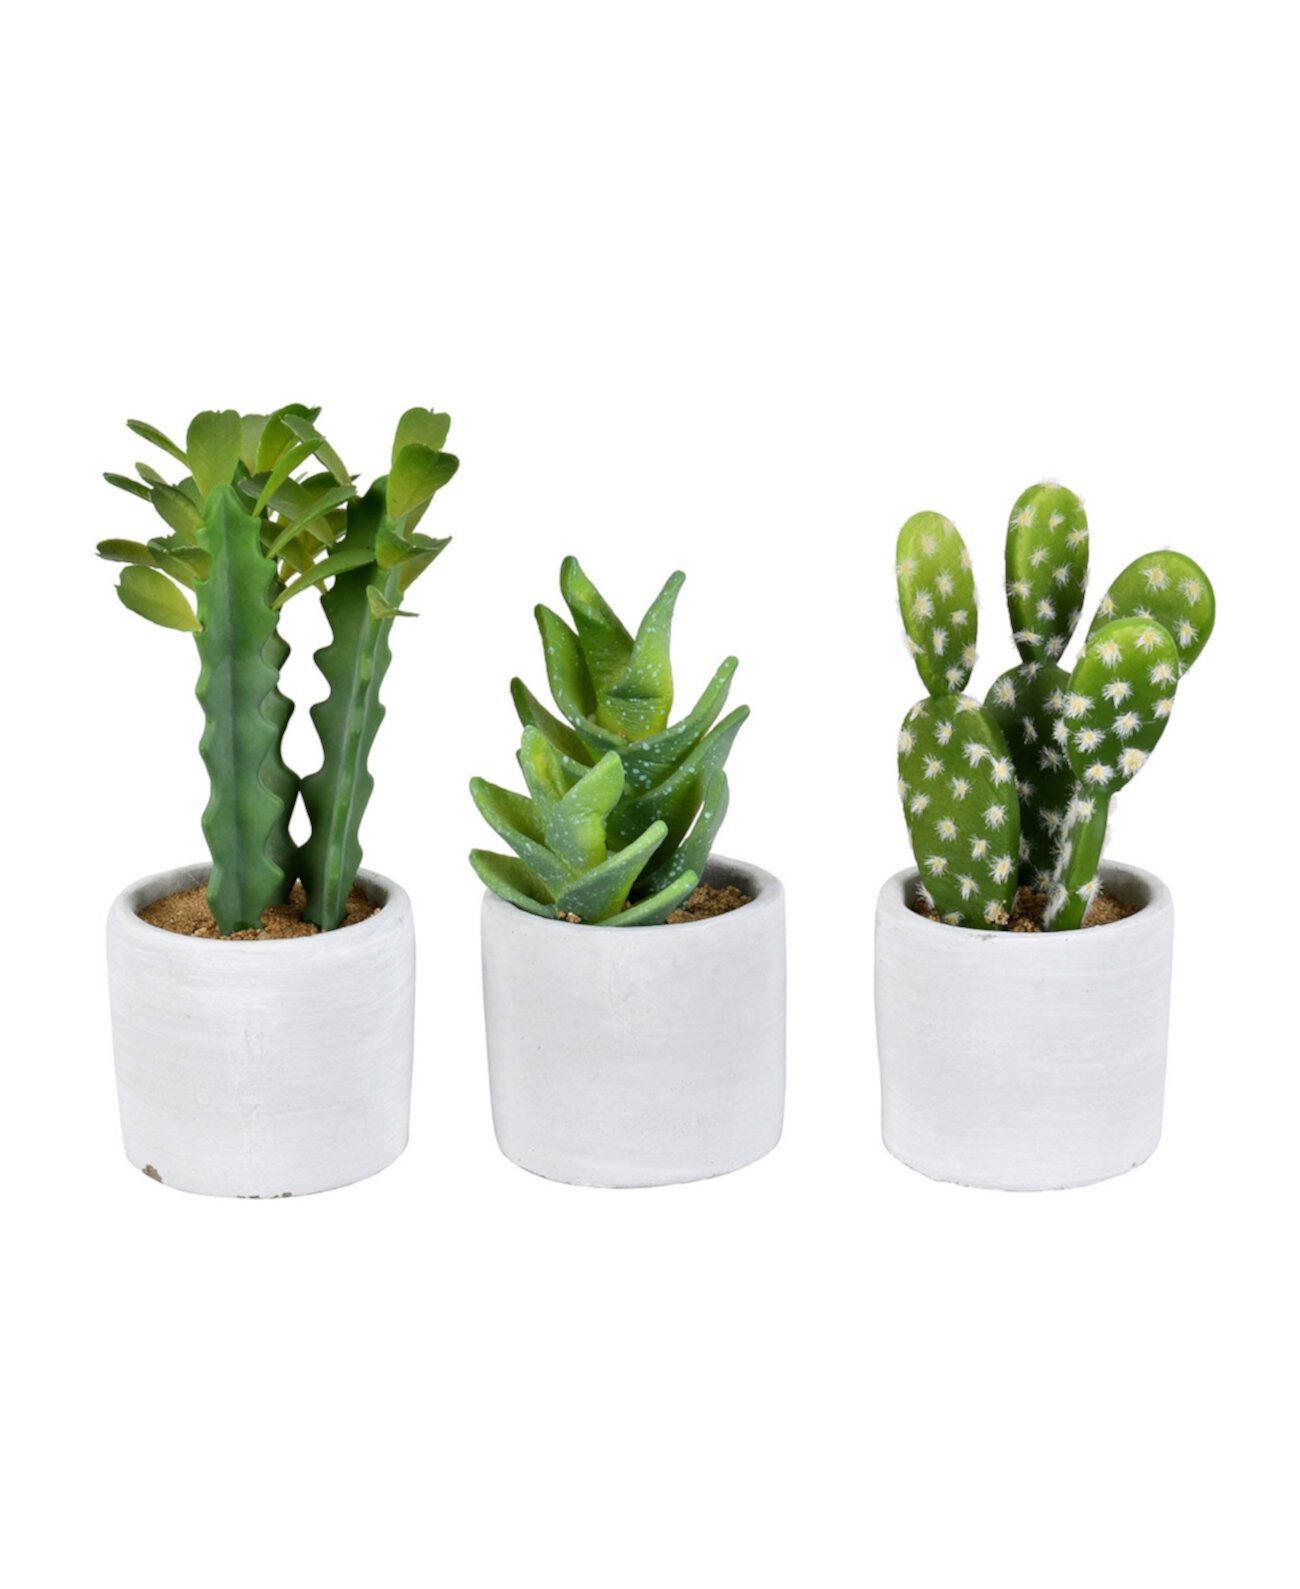 Set of 3 Assorted 7" Potted Artificial Cactus Plants, Set of 3 Vickerman